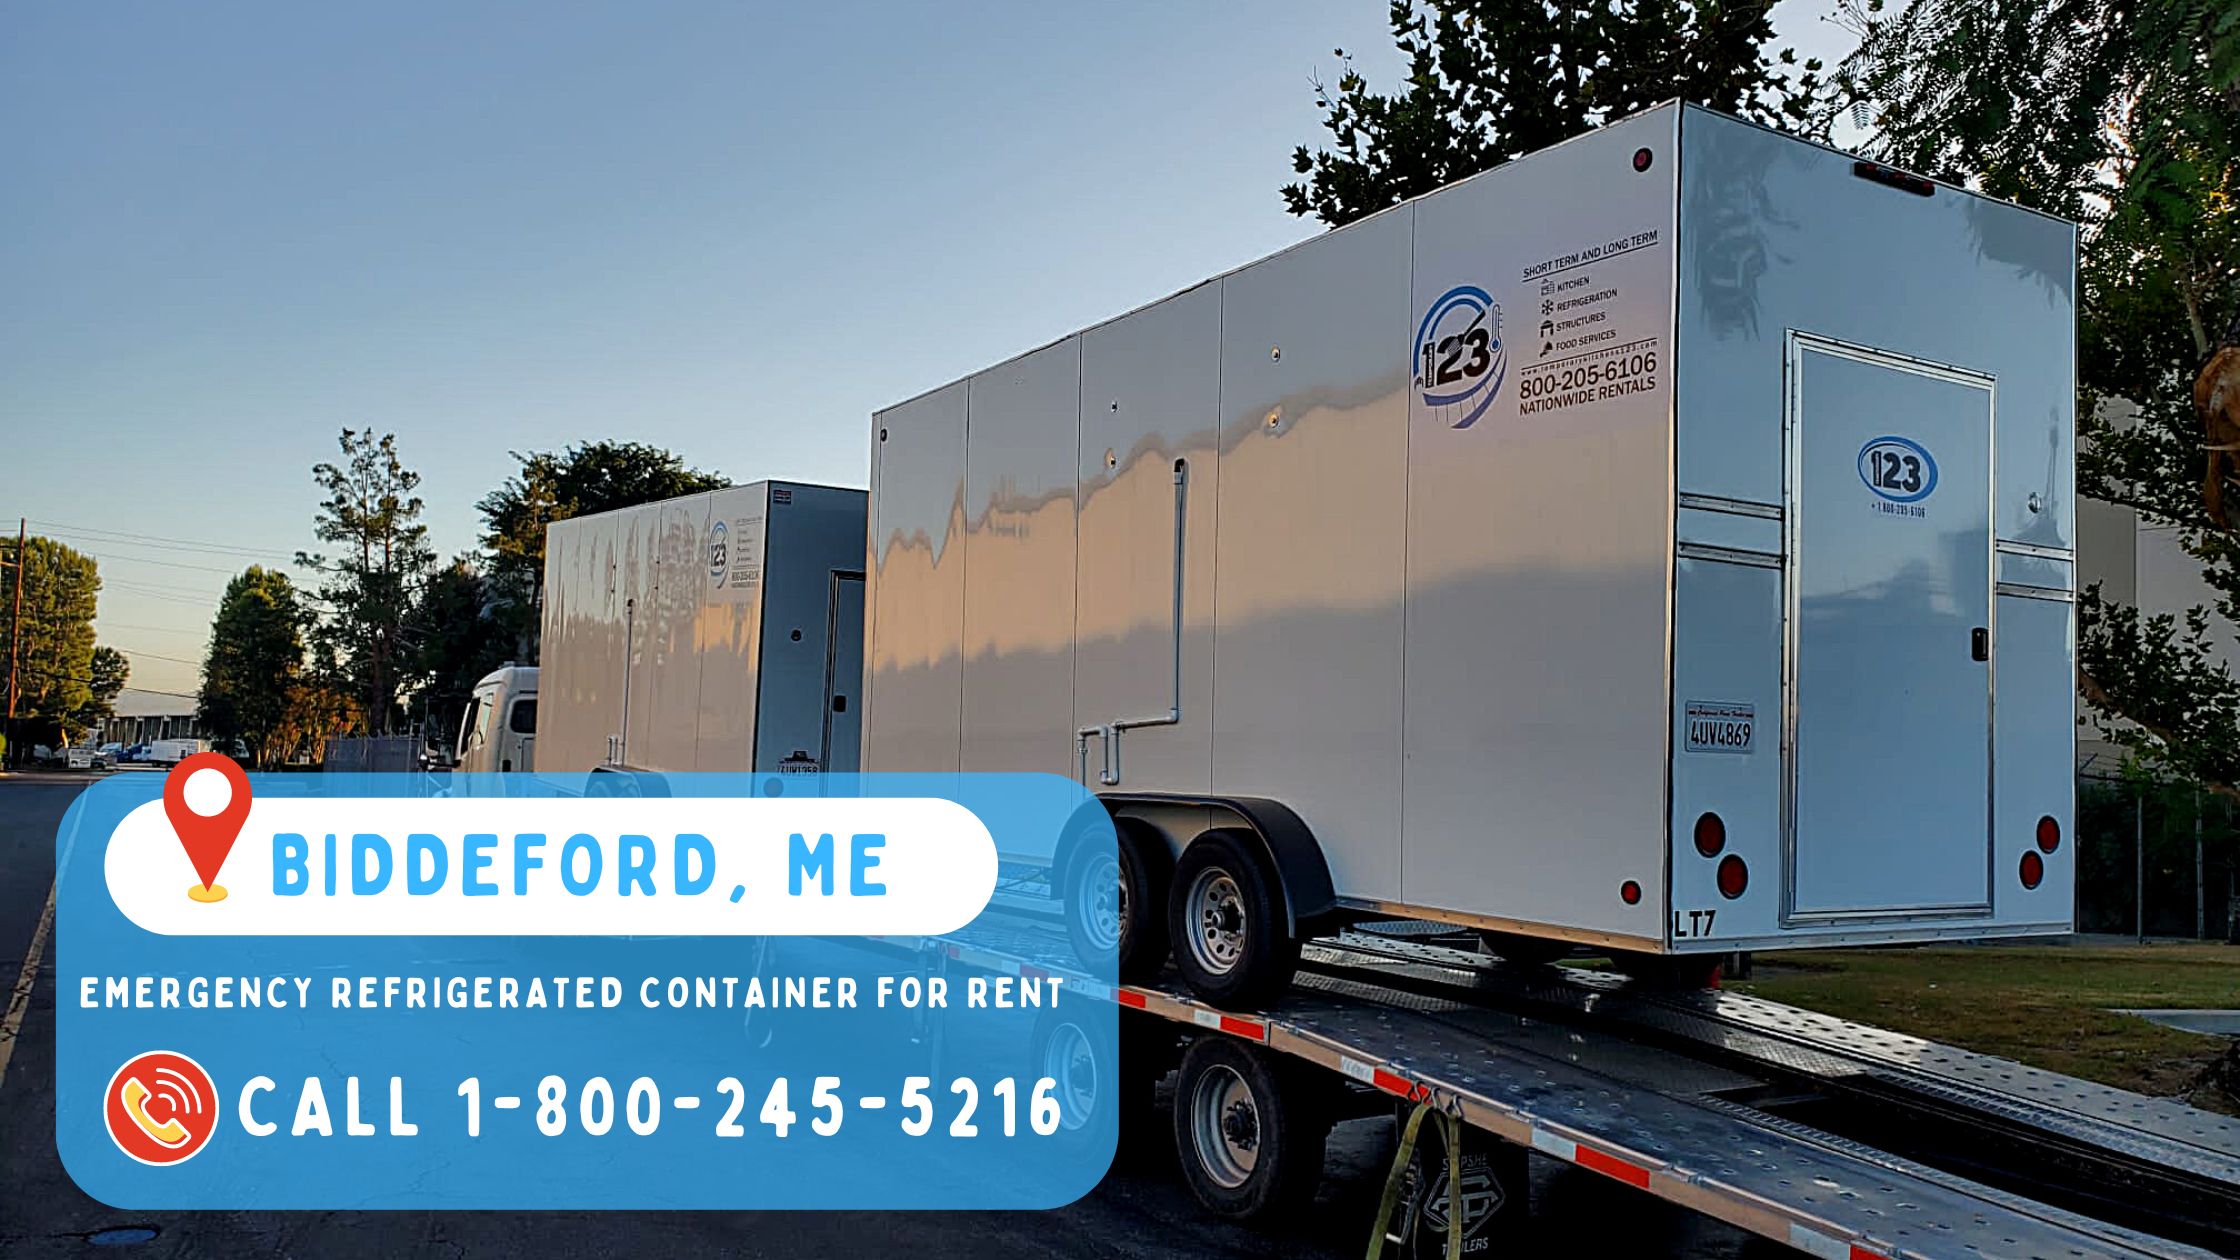 Emergency refrigerated container for rent in Biddeford